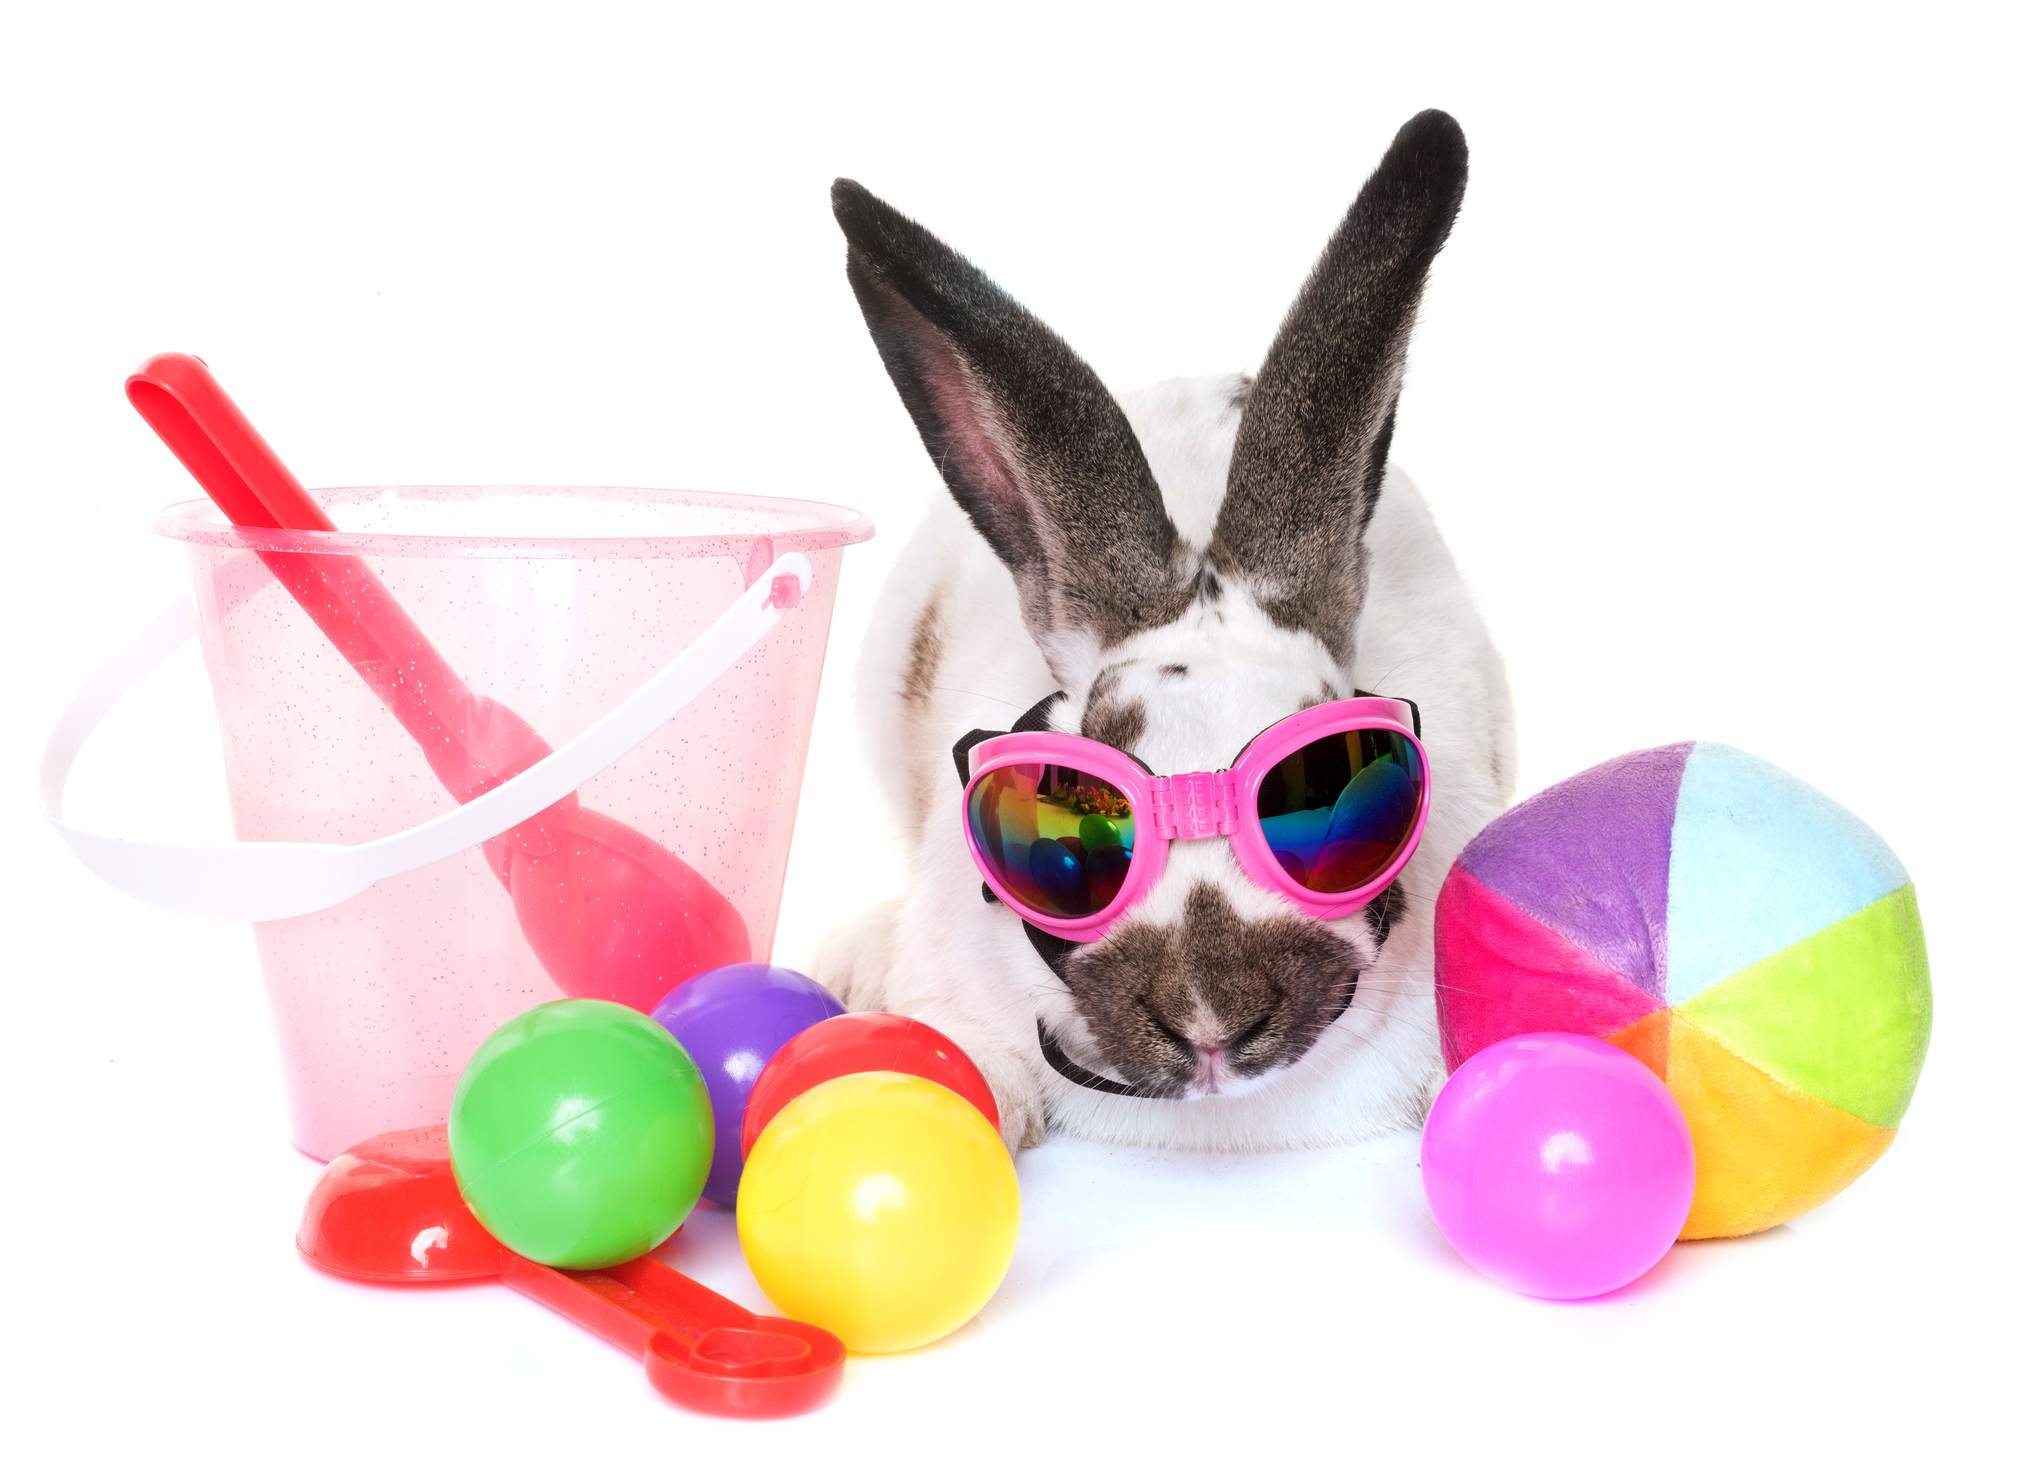 A rabbit wearing sunglasses, surrounded by toys